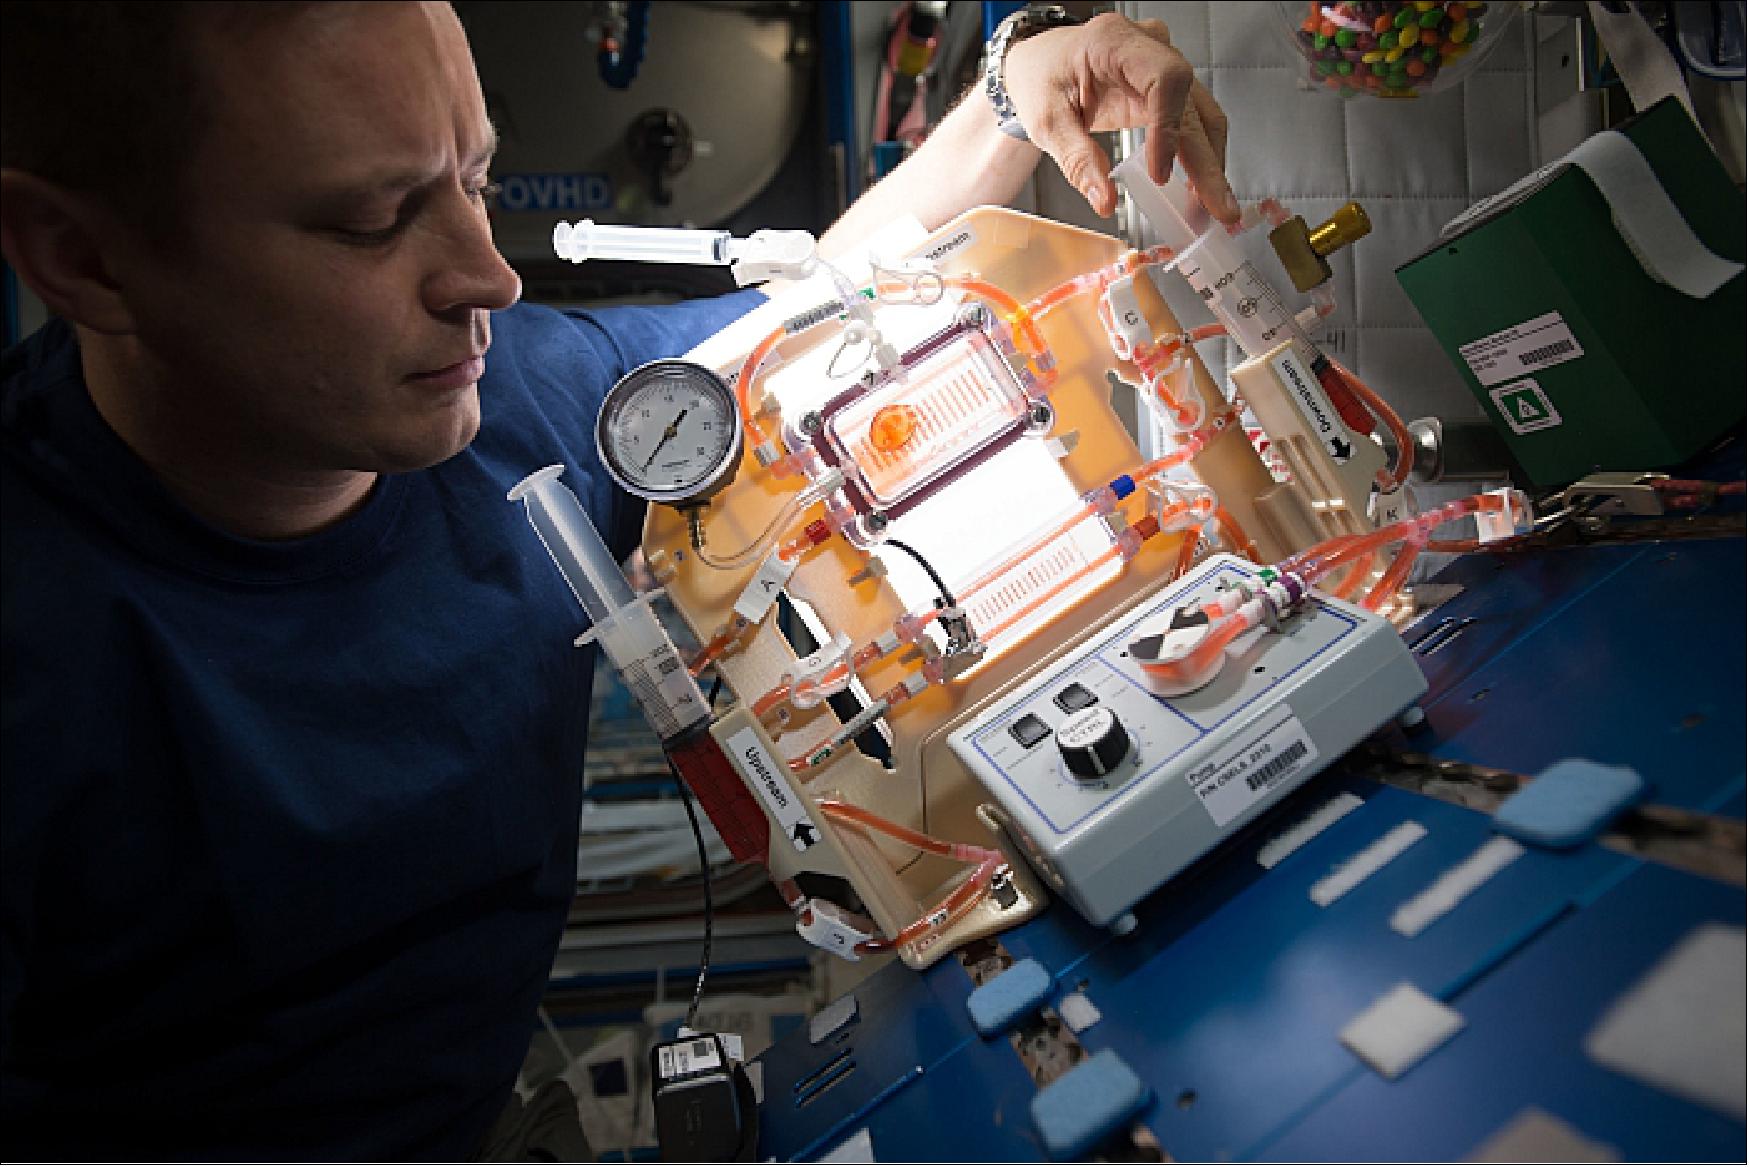 Figure 51: NASA astronaut Jack Fischer sets up hardware for the Capillary Structures investigation into ways to manage fluid and gas mixtures for water recycling and carbon dioxide removal. Results benefit design of lightweight, more reliable life support systems for future space missions (image credit: NASA)